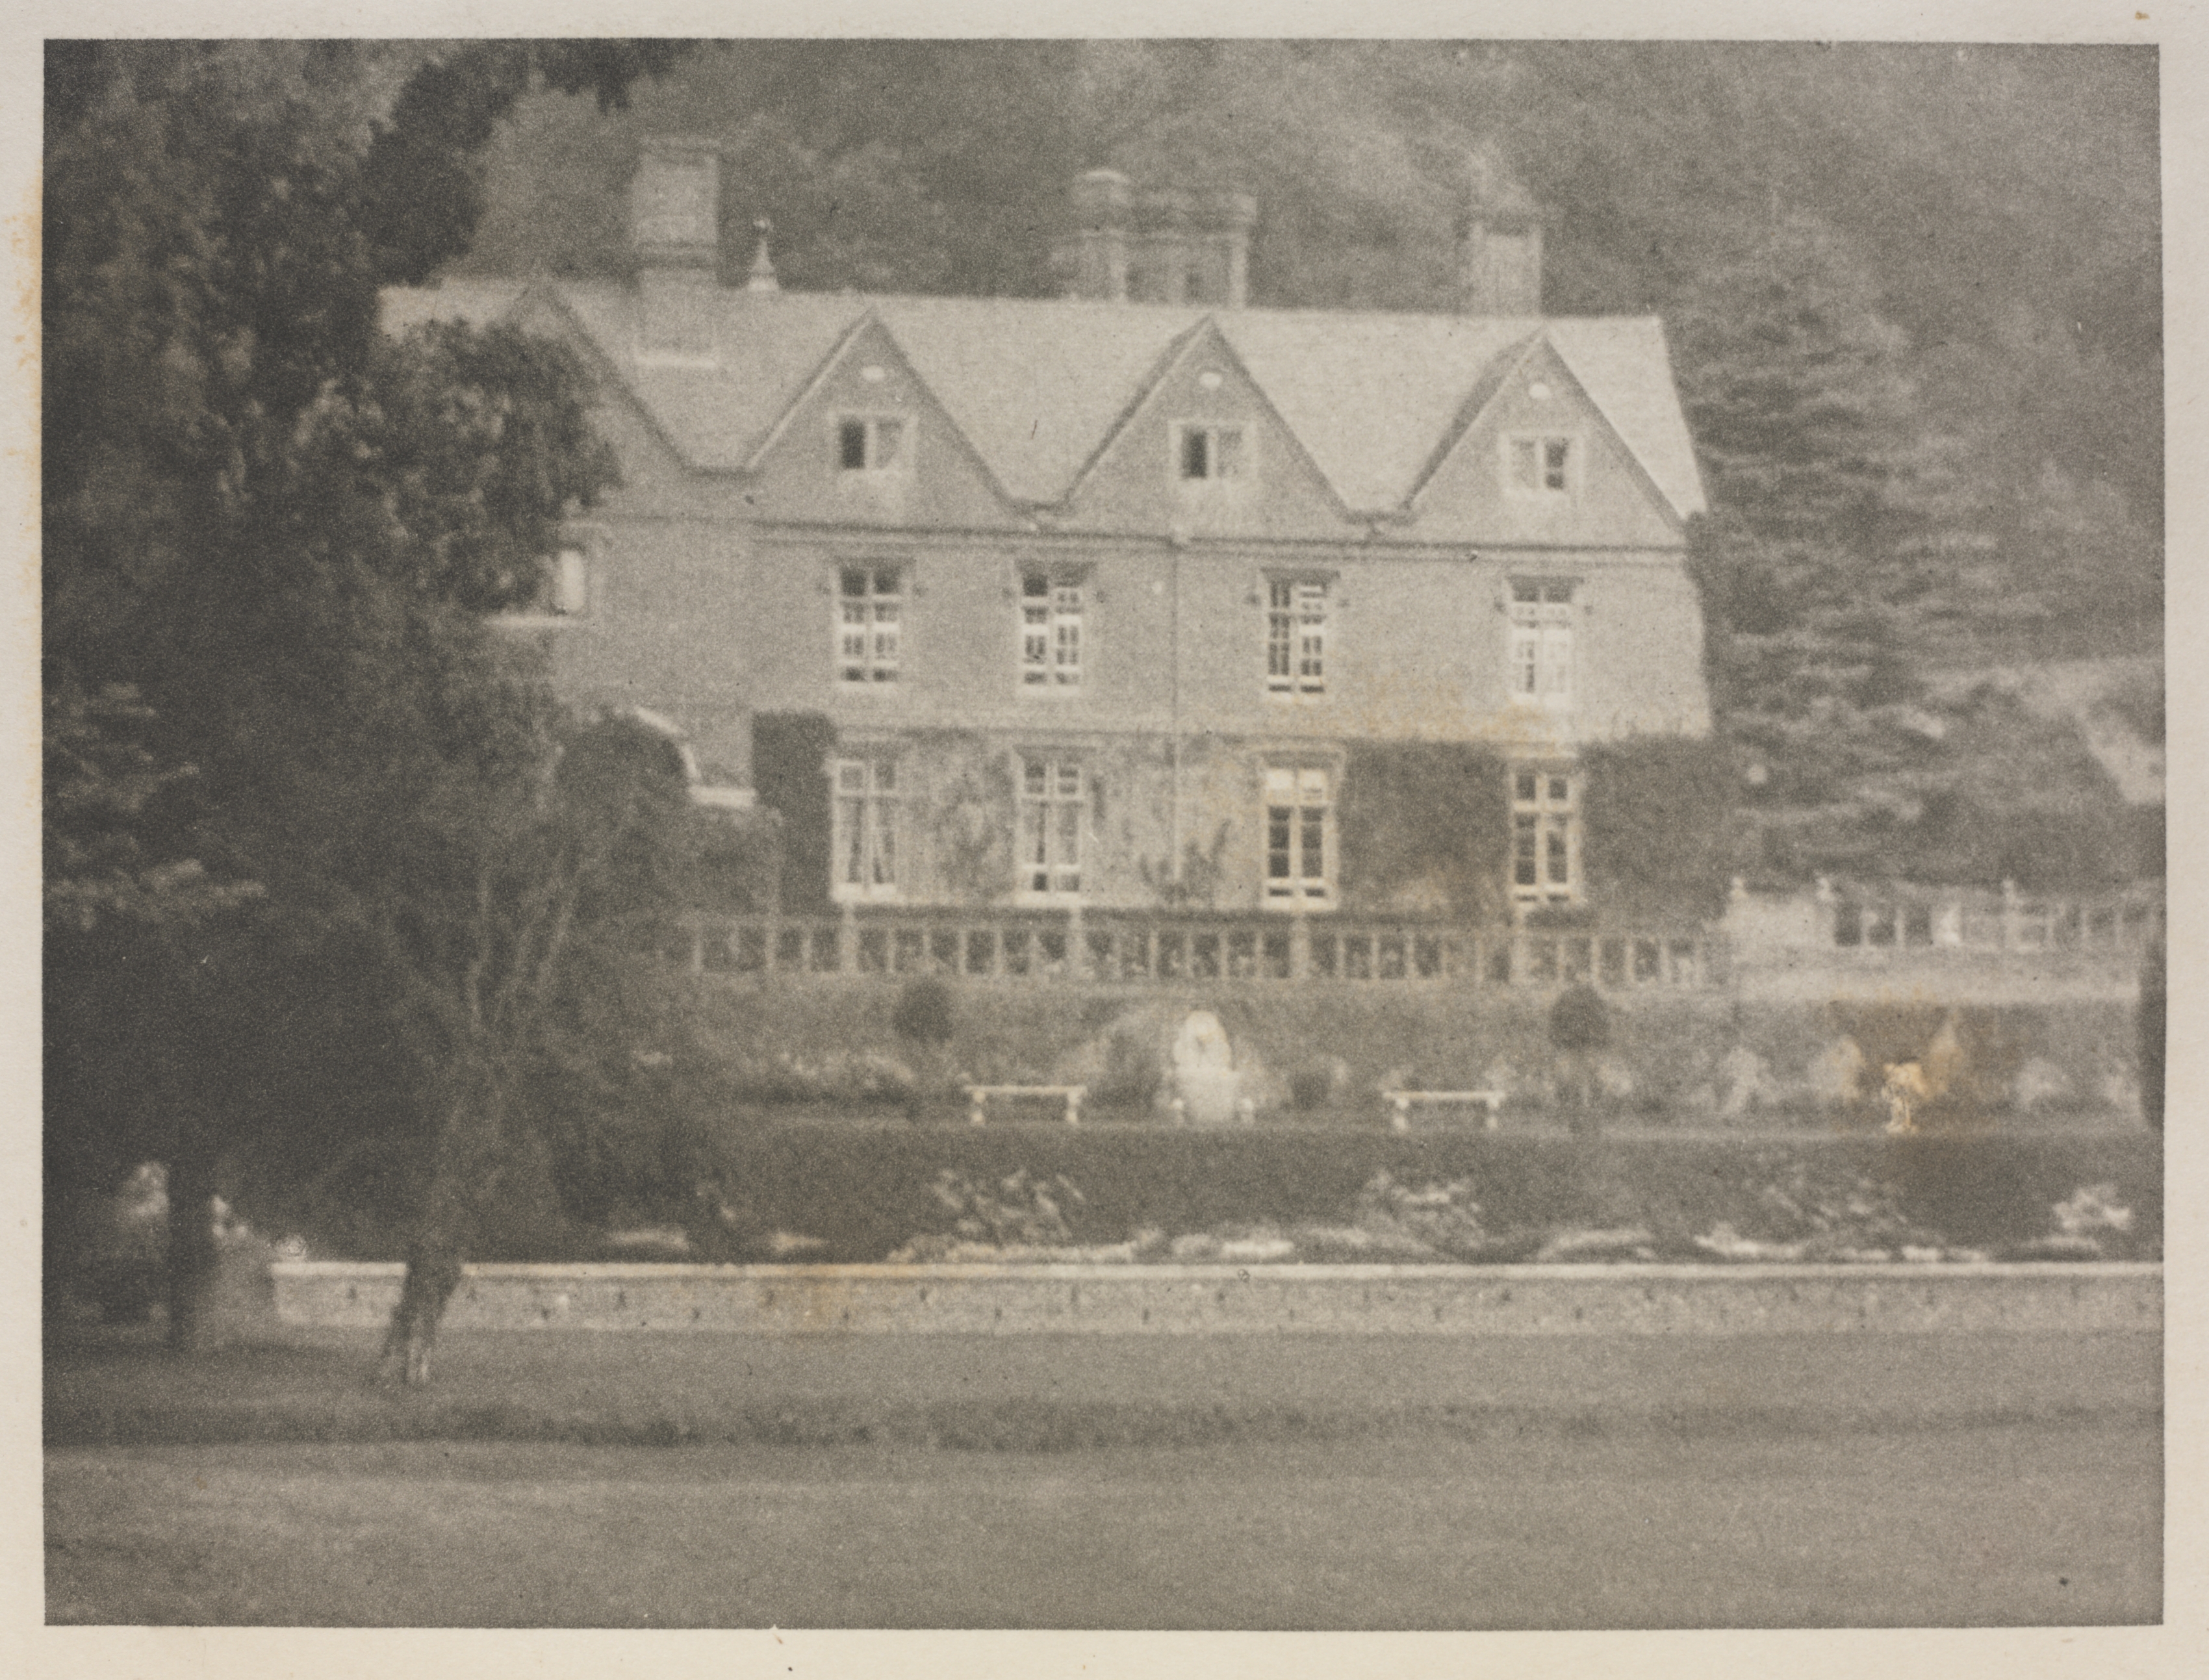 The Novels and Tales, by Henry James: The English Home